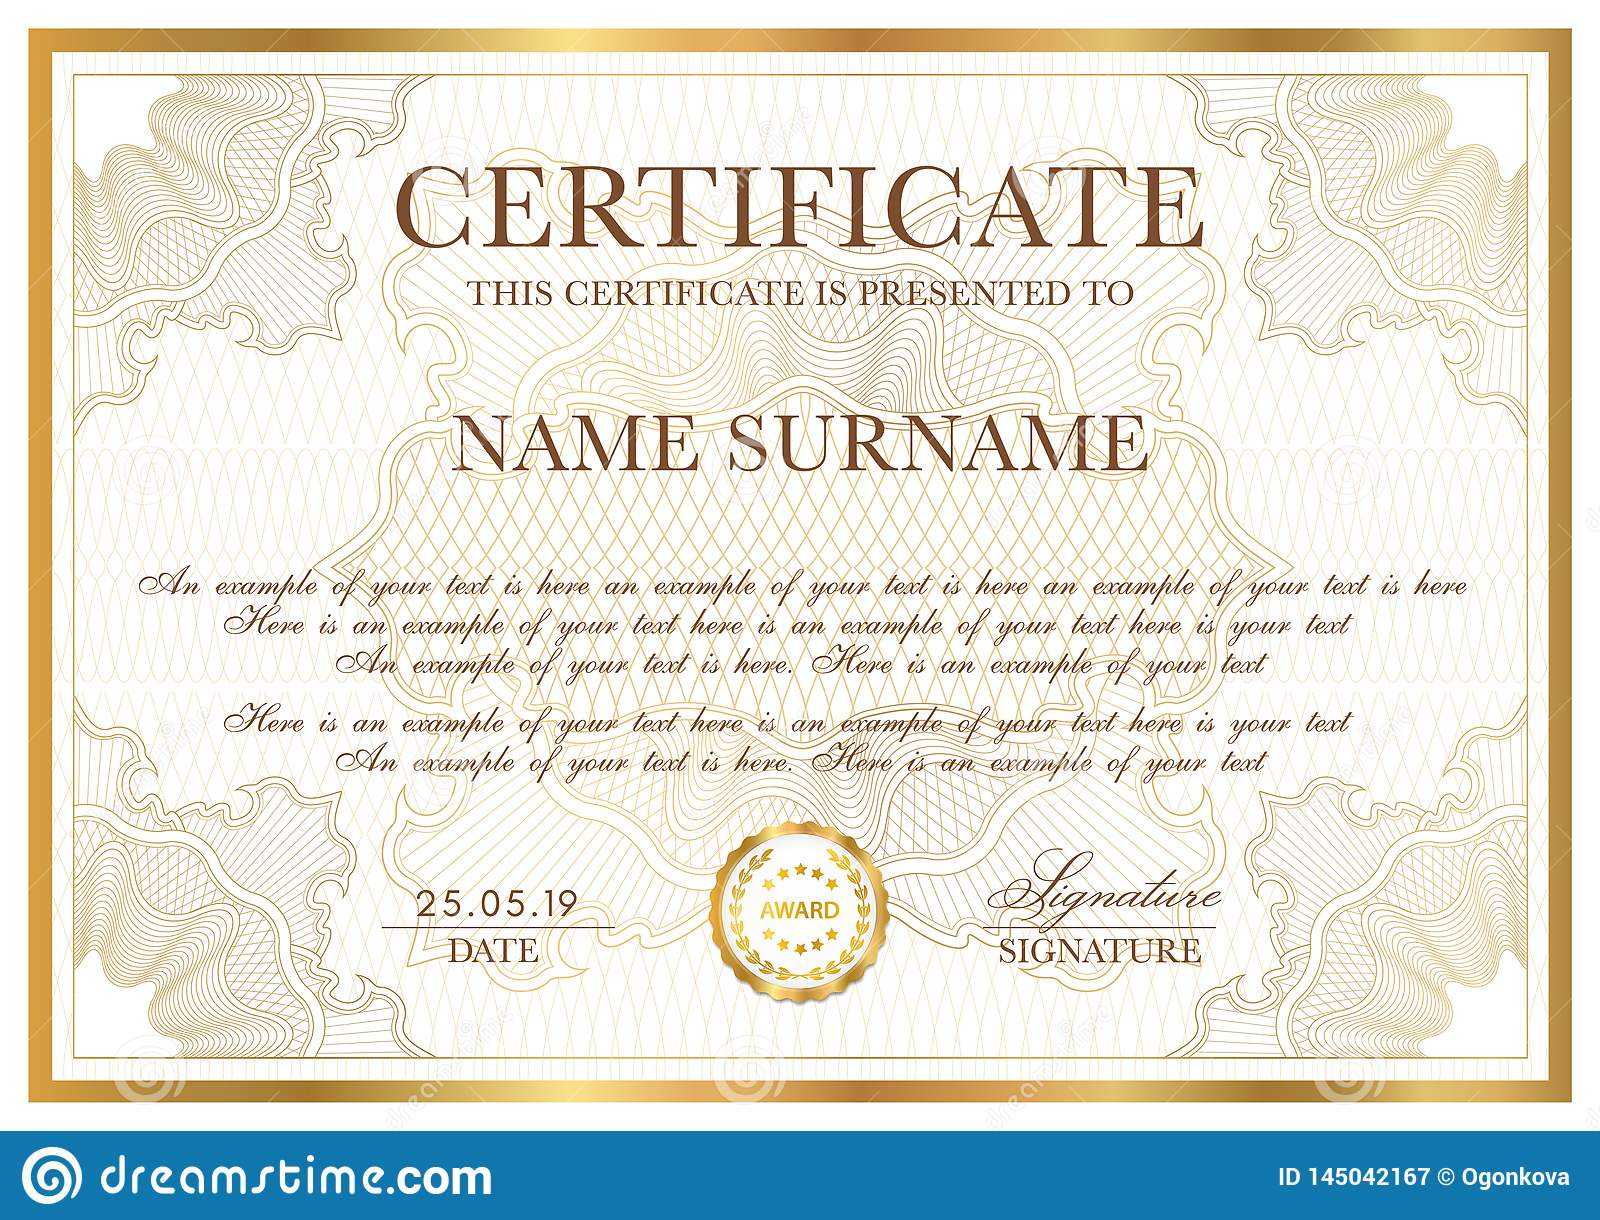 Certificate Template. Gold Border With Guilloche Pattern Inside Certificate Of Authenticity Template